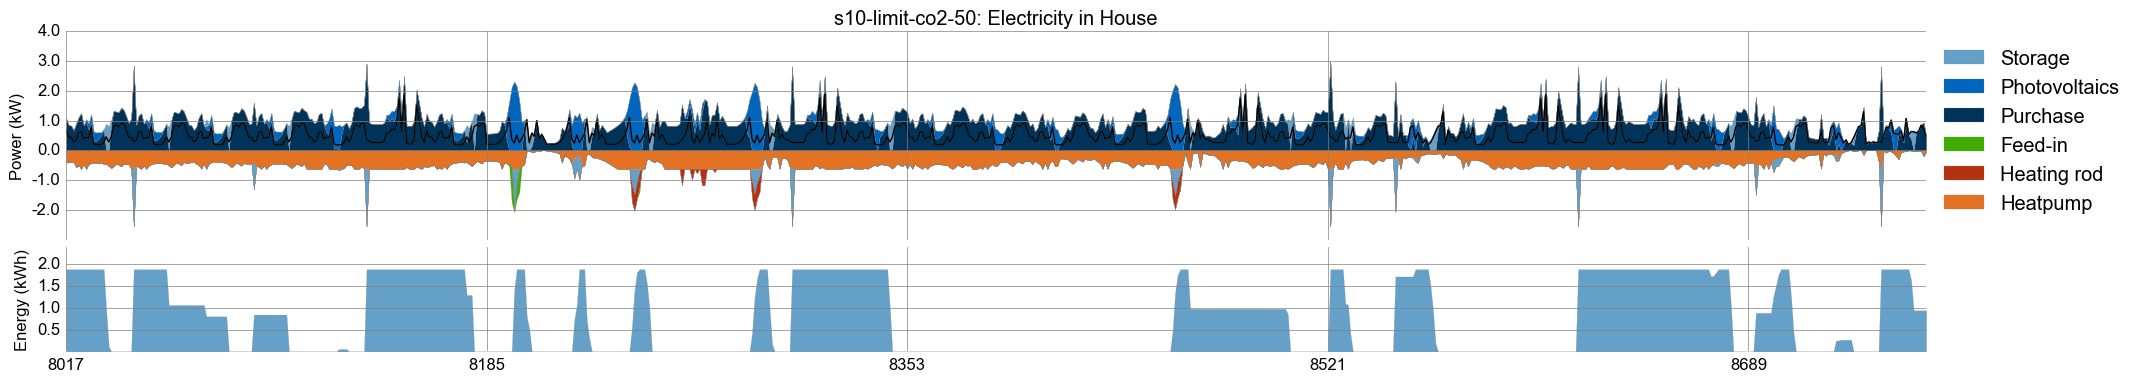 Timeseries plot of month December for electricity generation in scenario s10: CO2 limit 50%